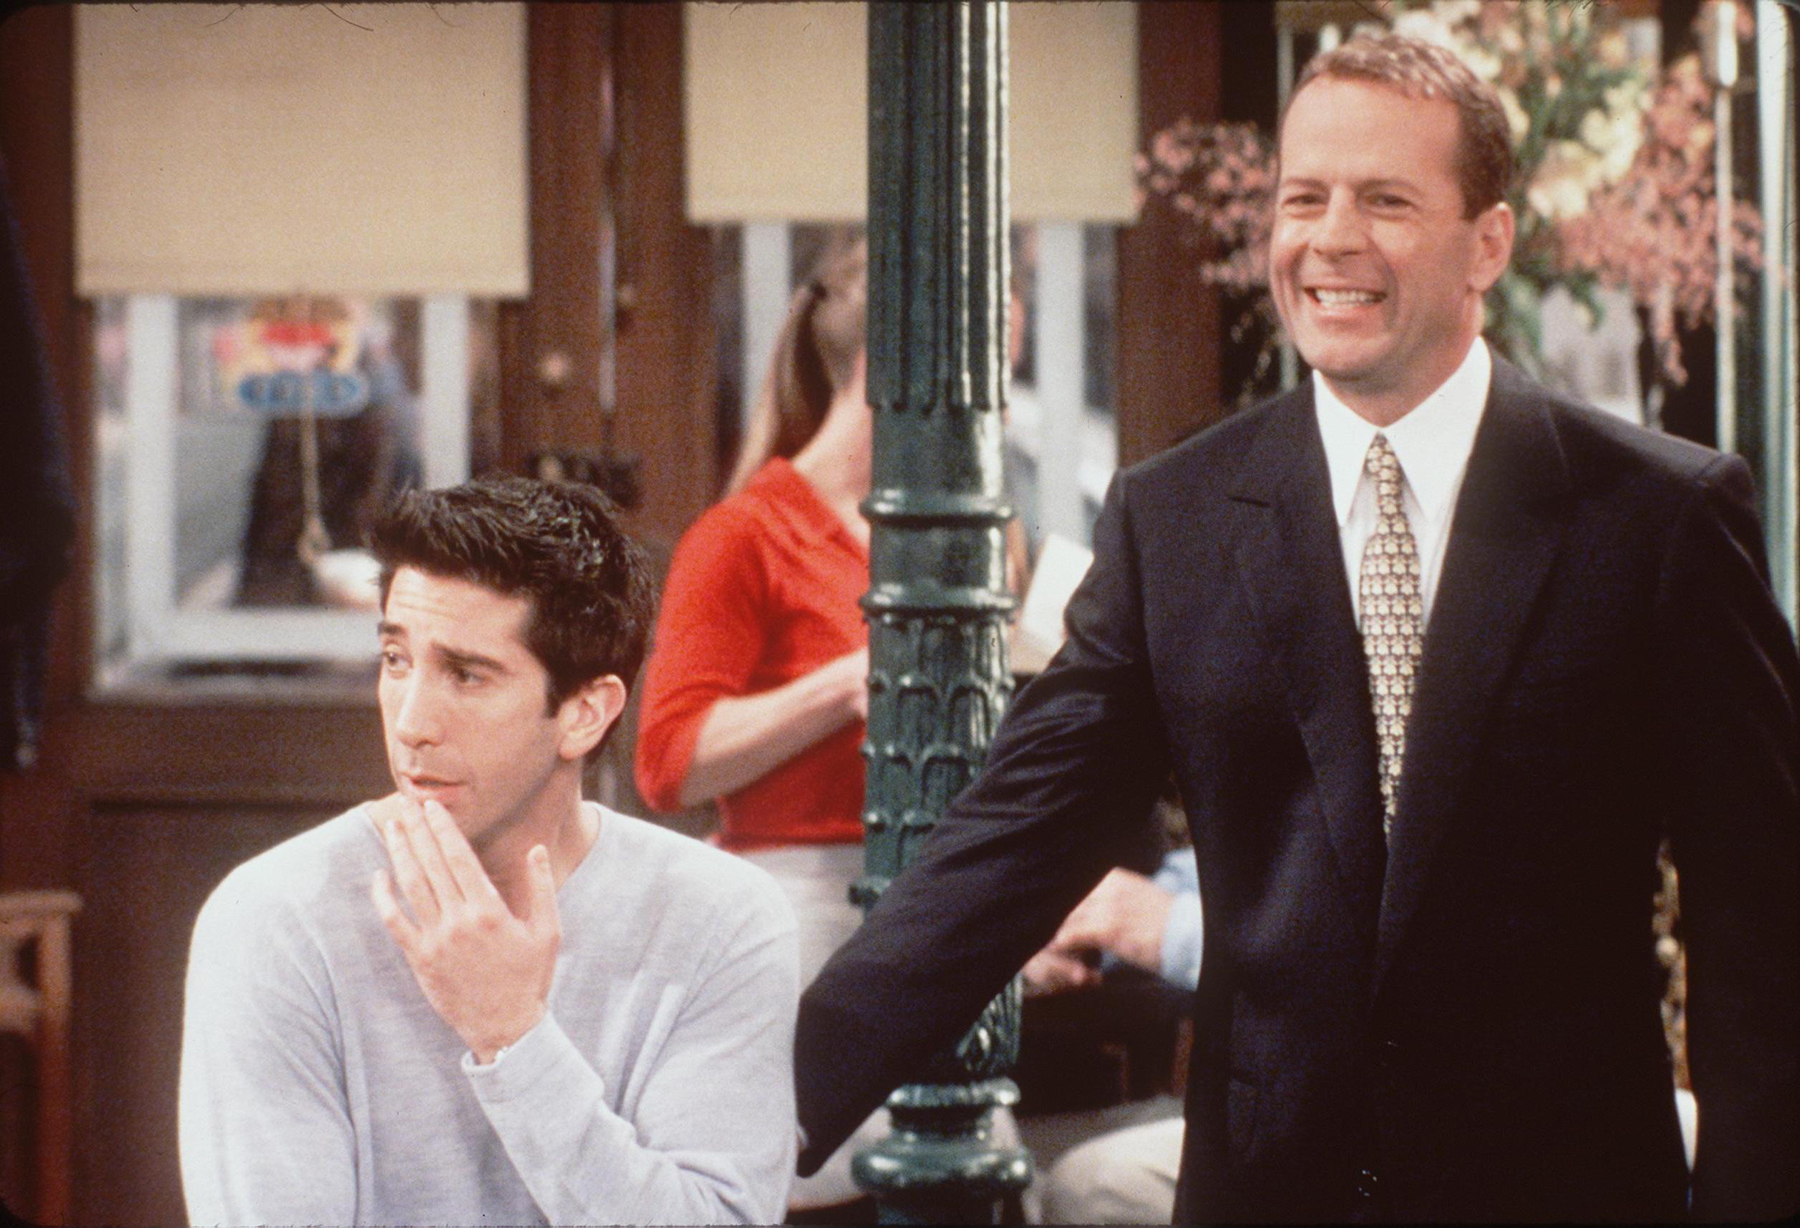 E366967 1999-2000 David Schwimmer,Bruce Willis (who plays Paul) guest starring on "Friends"(The One Where Ross Meet''s Elizabeth''s Dad). Photo  Image Credits: Paul Drinkwater NBC